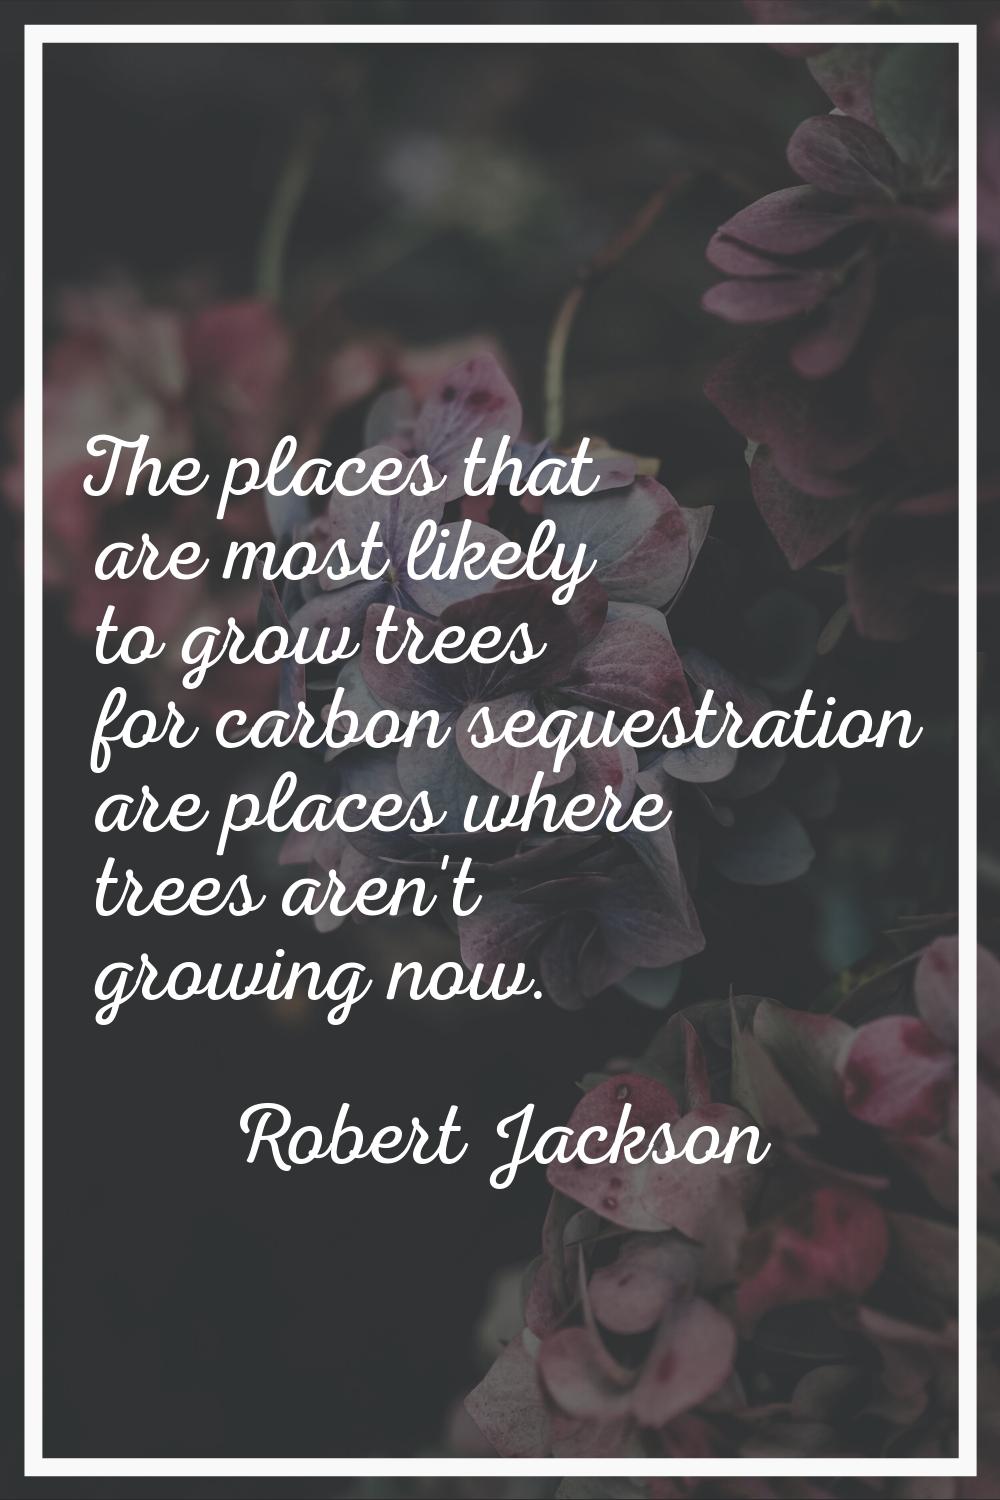 The places that are most likely to grow trees for carbon sequestration are places where trees aren'